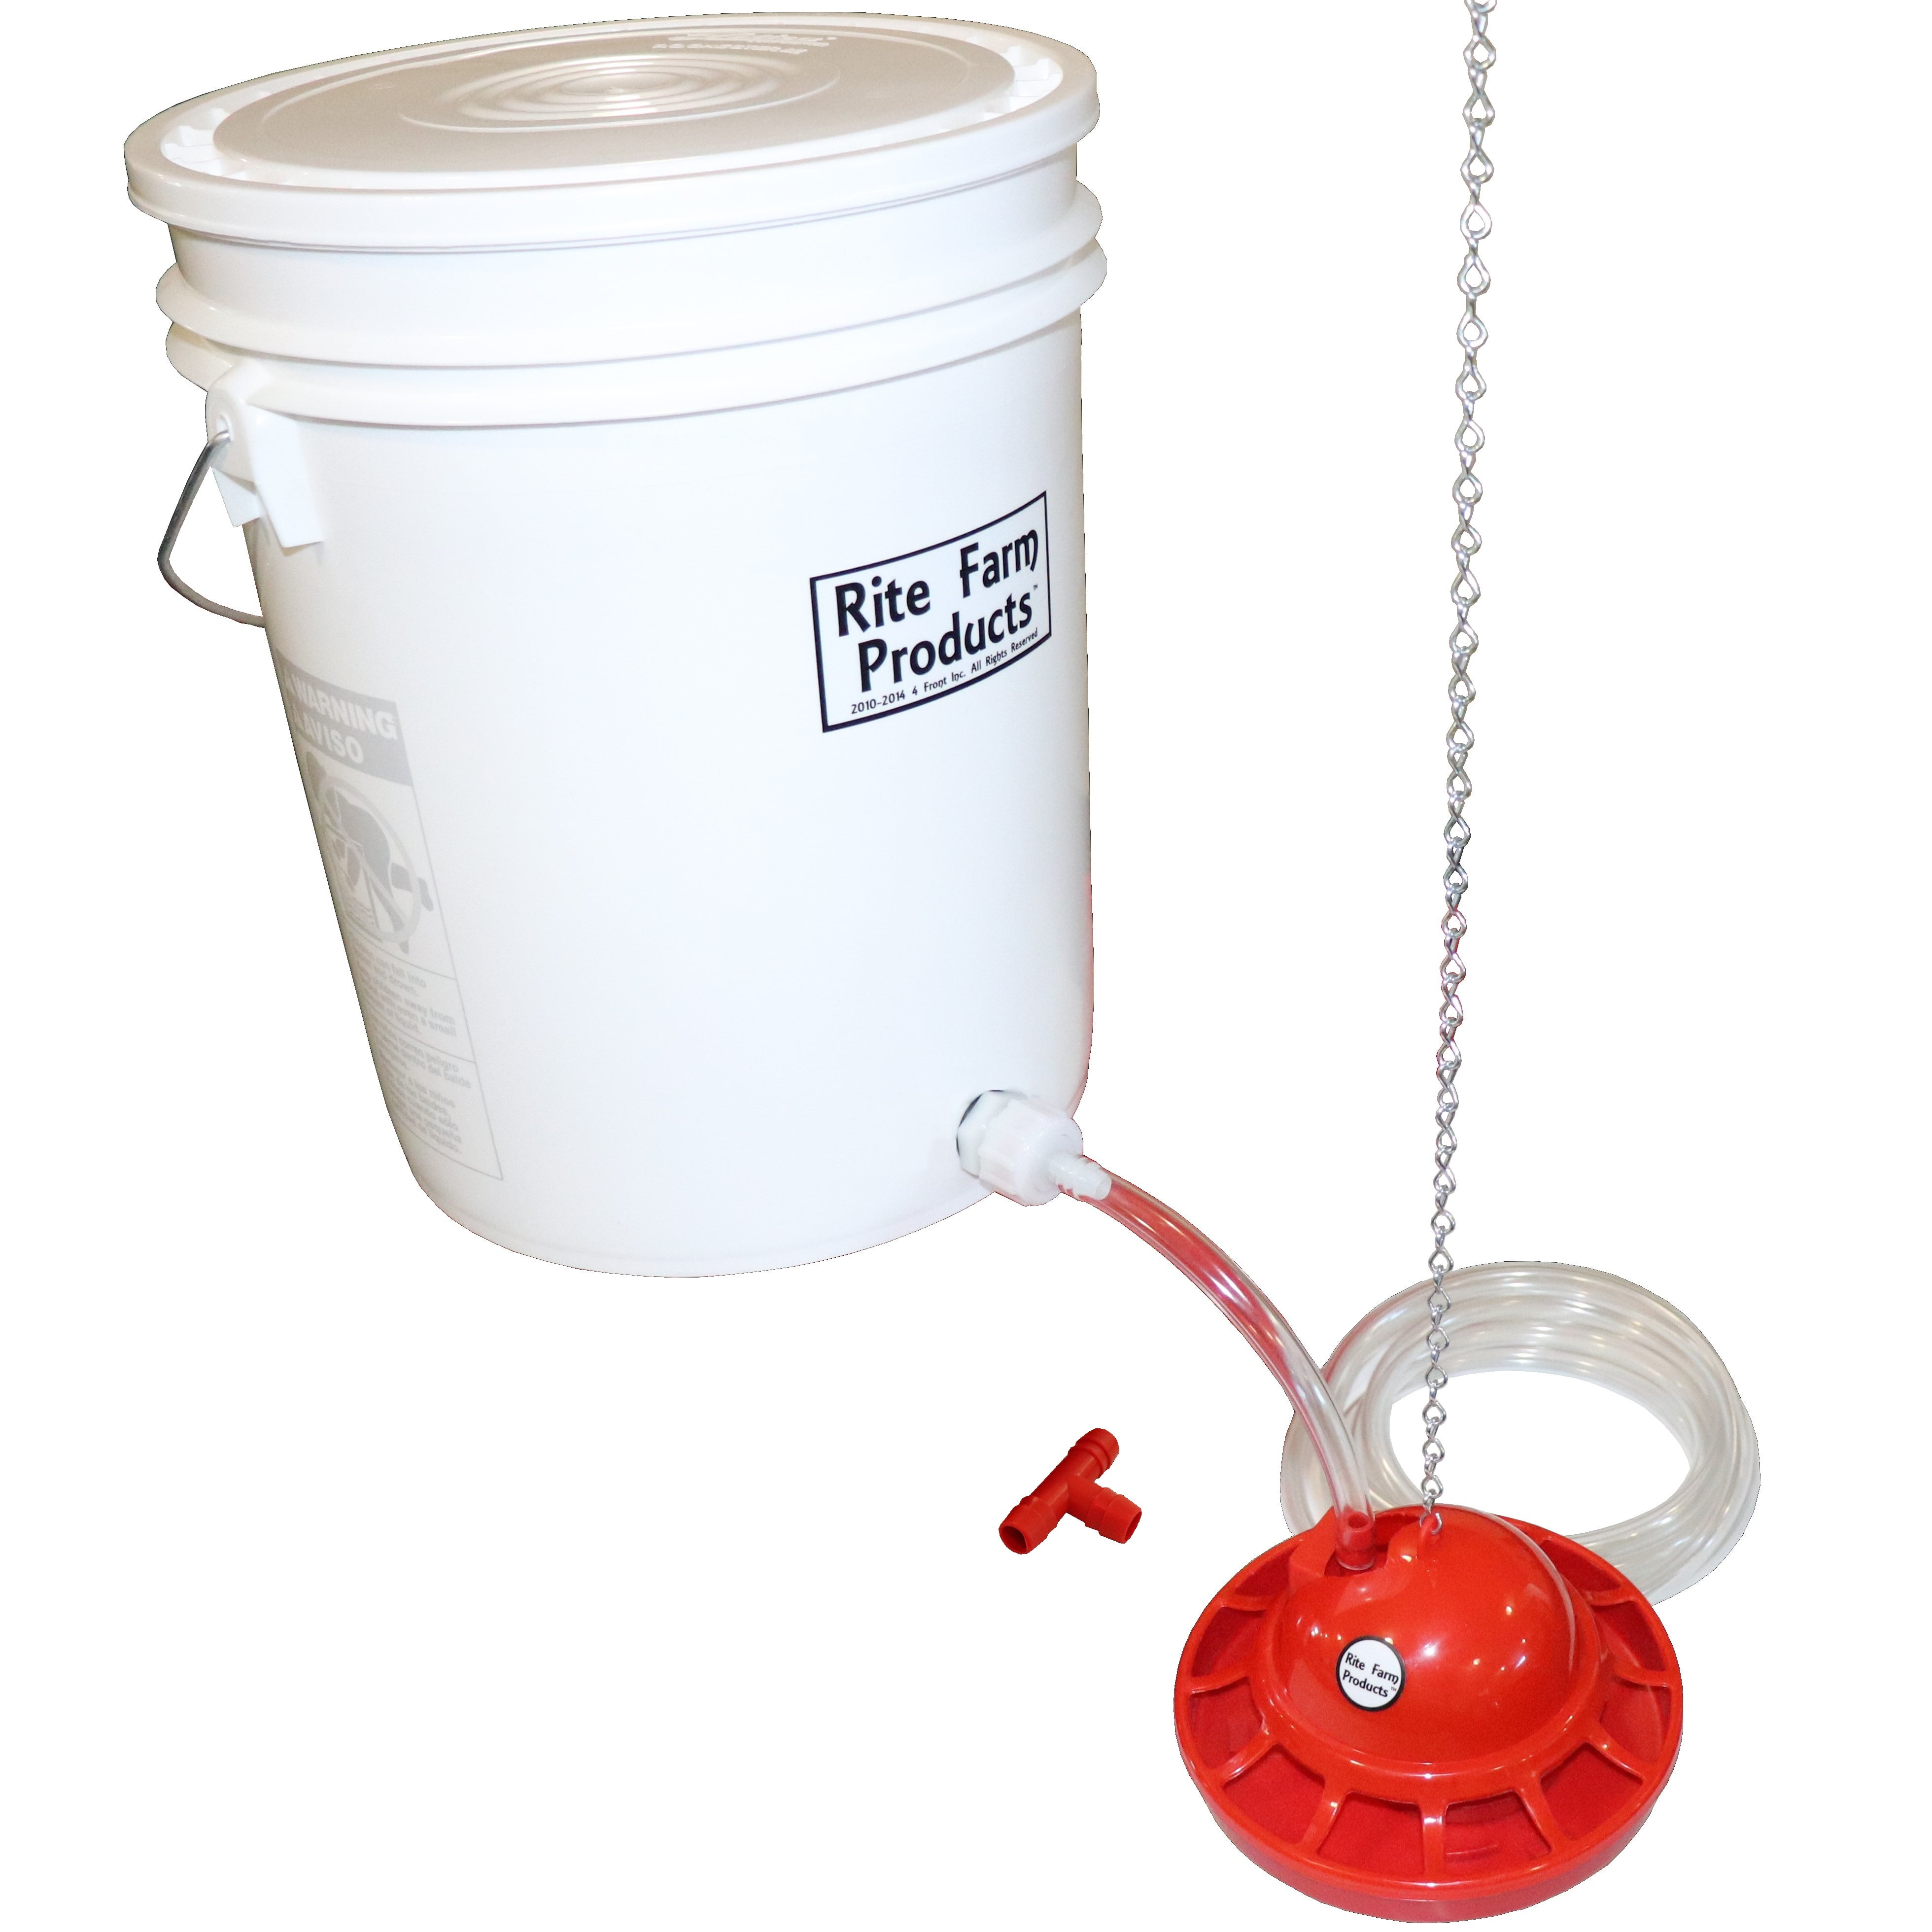 Rite Farm Products 3.7 Gallon Heated Poultry Chicken Waterer Drinker with LEDs 